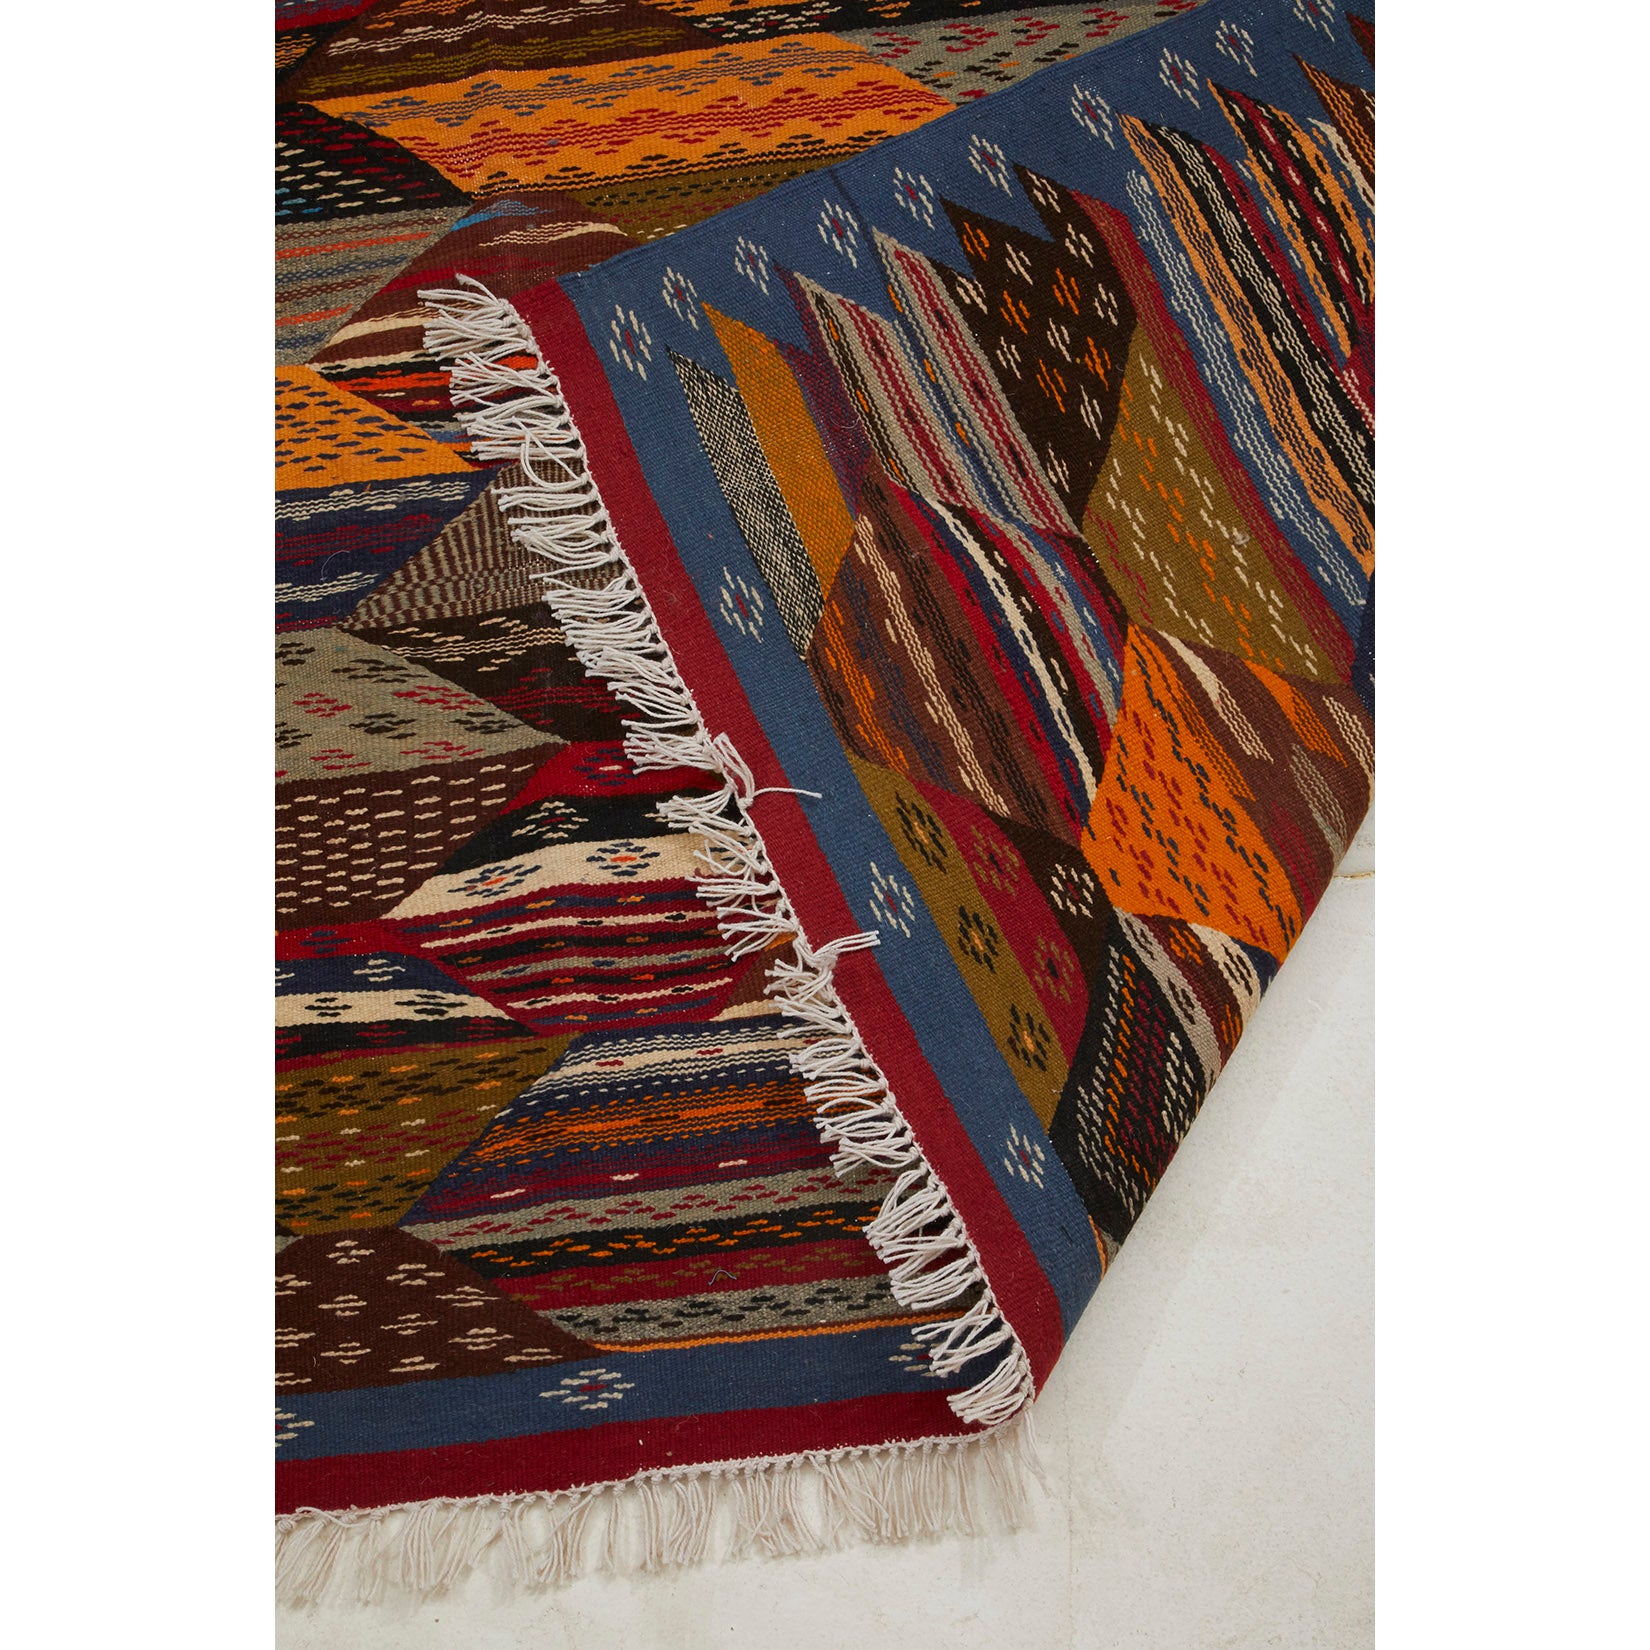 Moroccan flatweave kilim area rug with red, yellow, orange, and blue details - Kantara | Moroccan Rugs